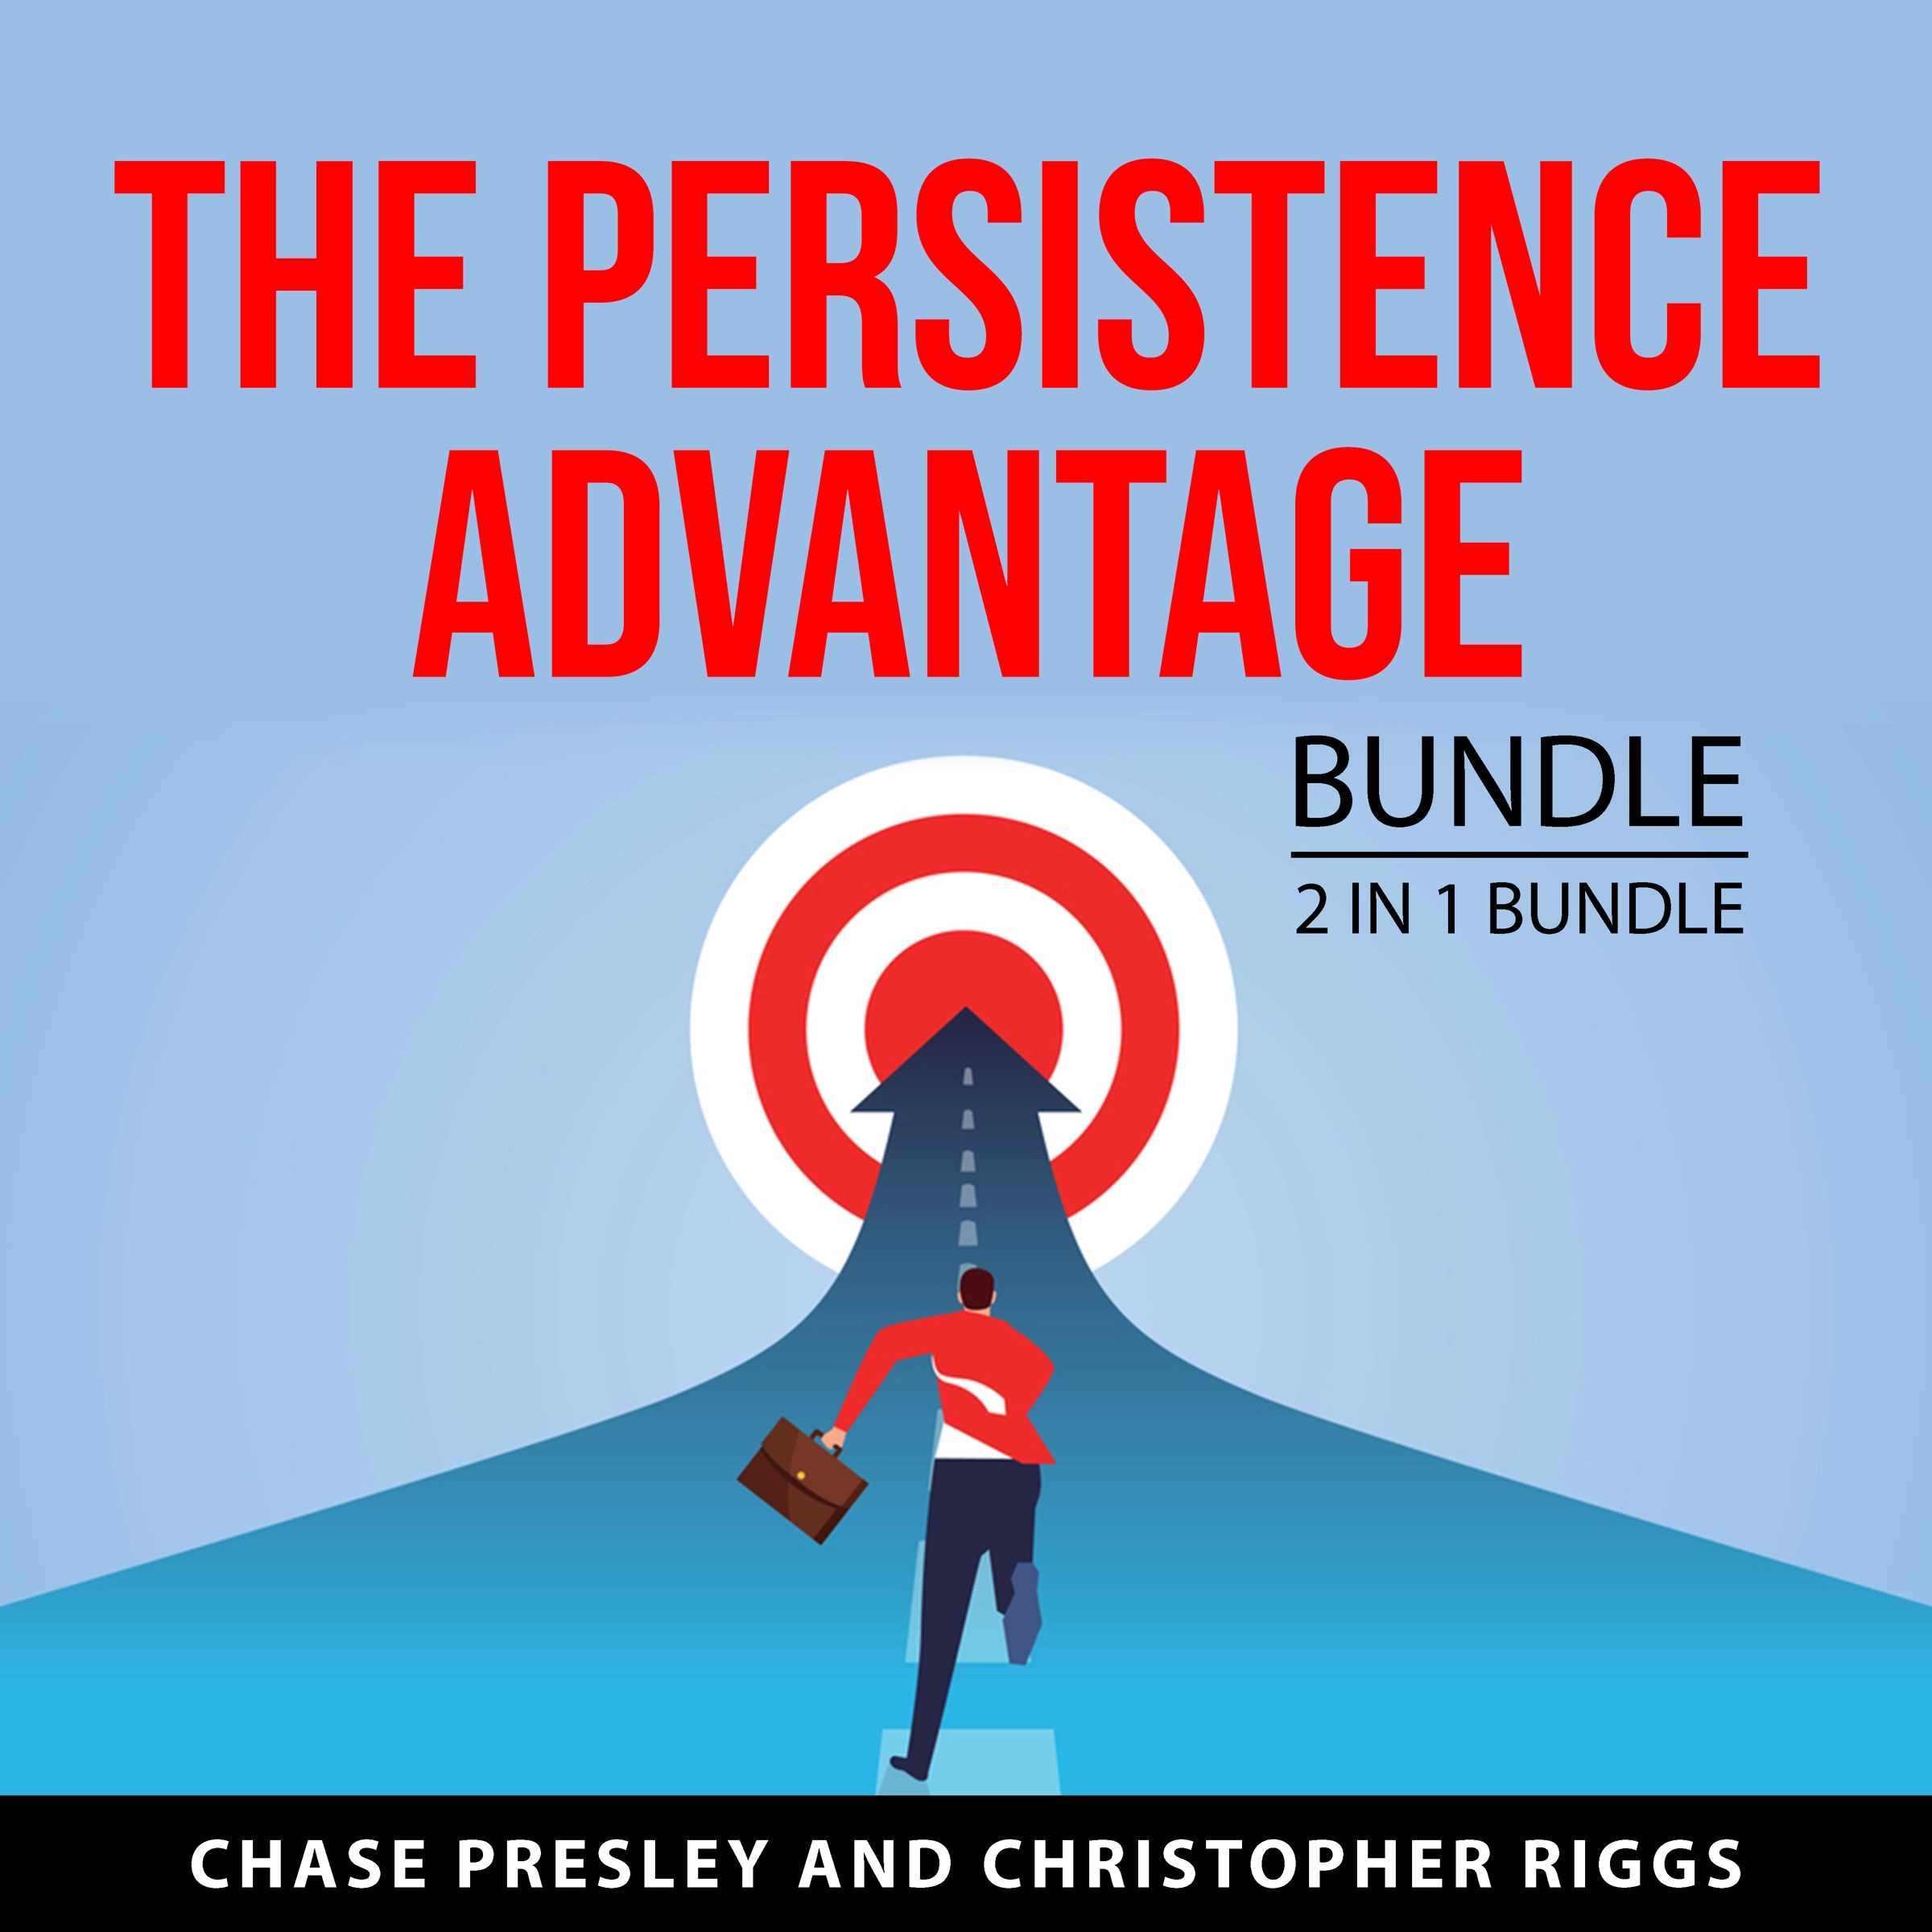 The Persistence Advantage Bundle, 2 in 1 Bundle Audiobook by Christopher Riggs